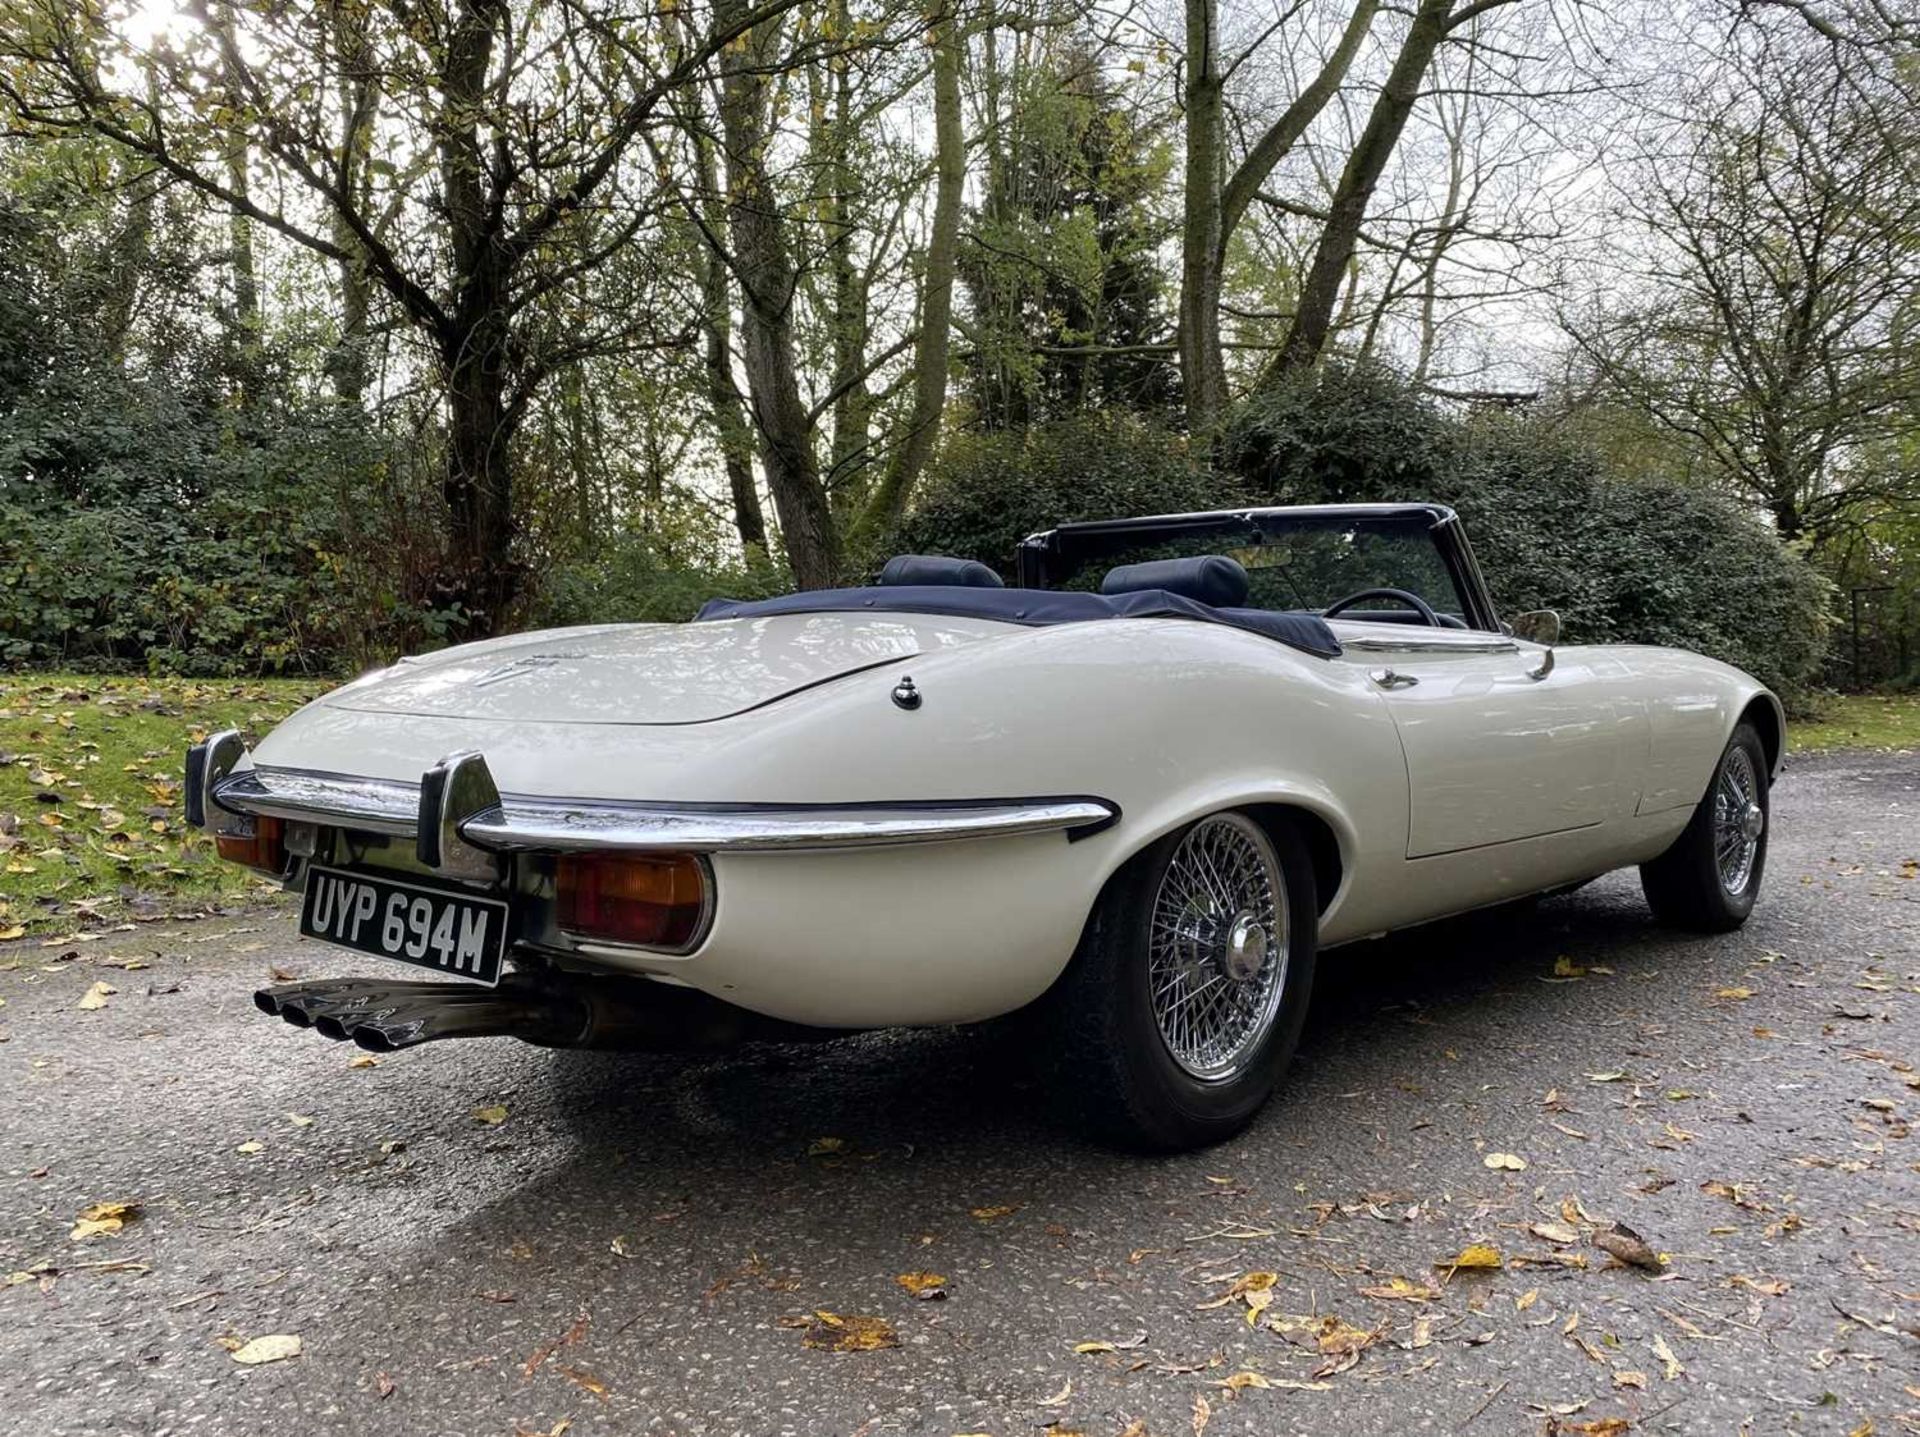 1973 Jaguar E-Type V12 Roadster As seen in Only Fools and Horses - Image 34 of 105